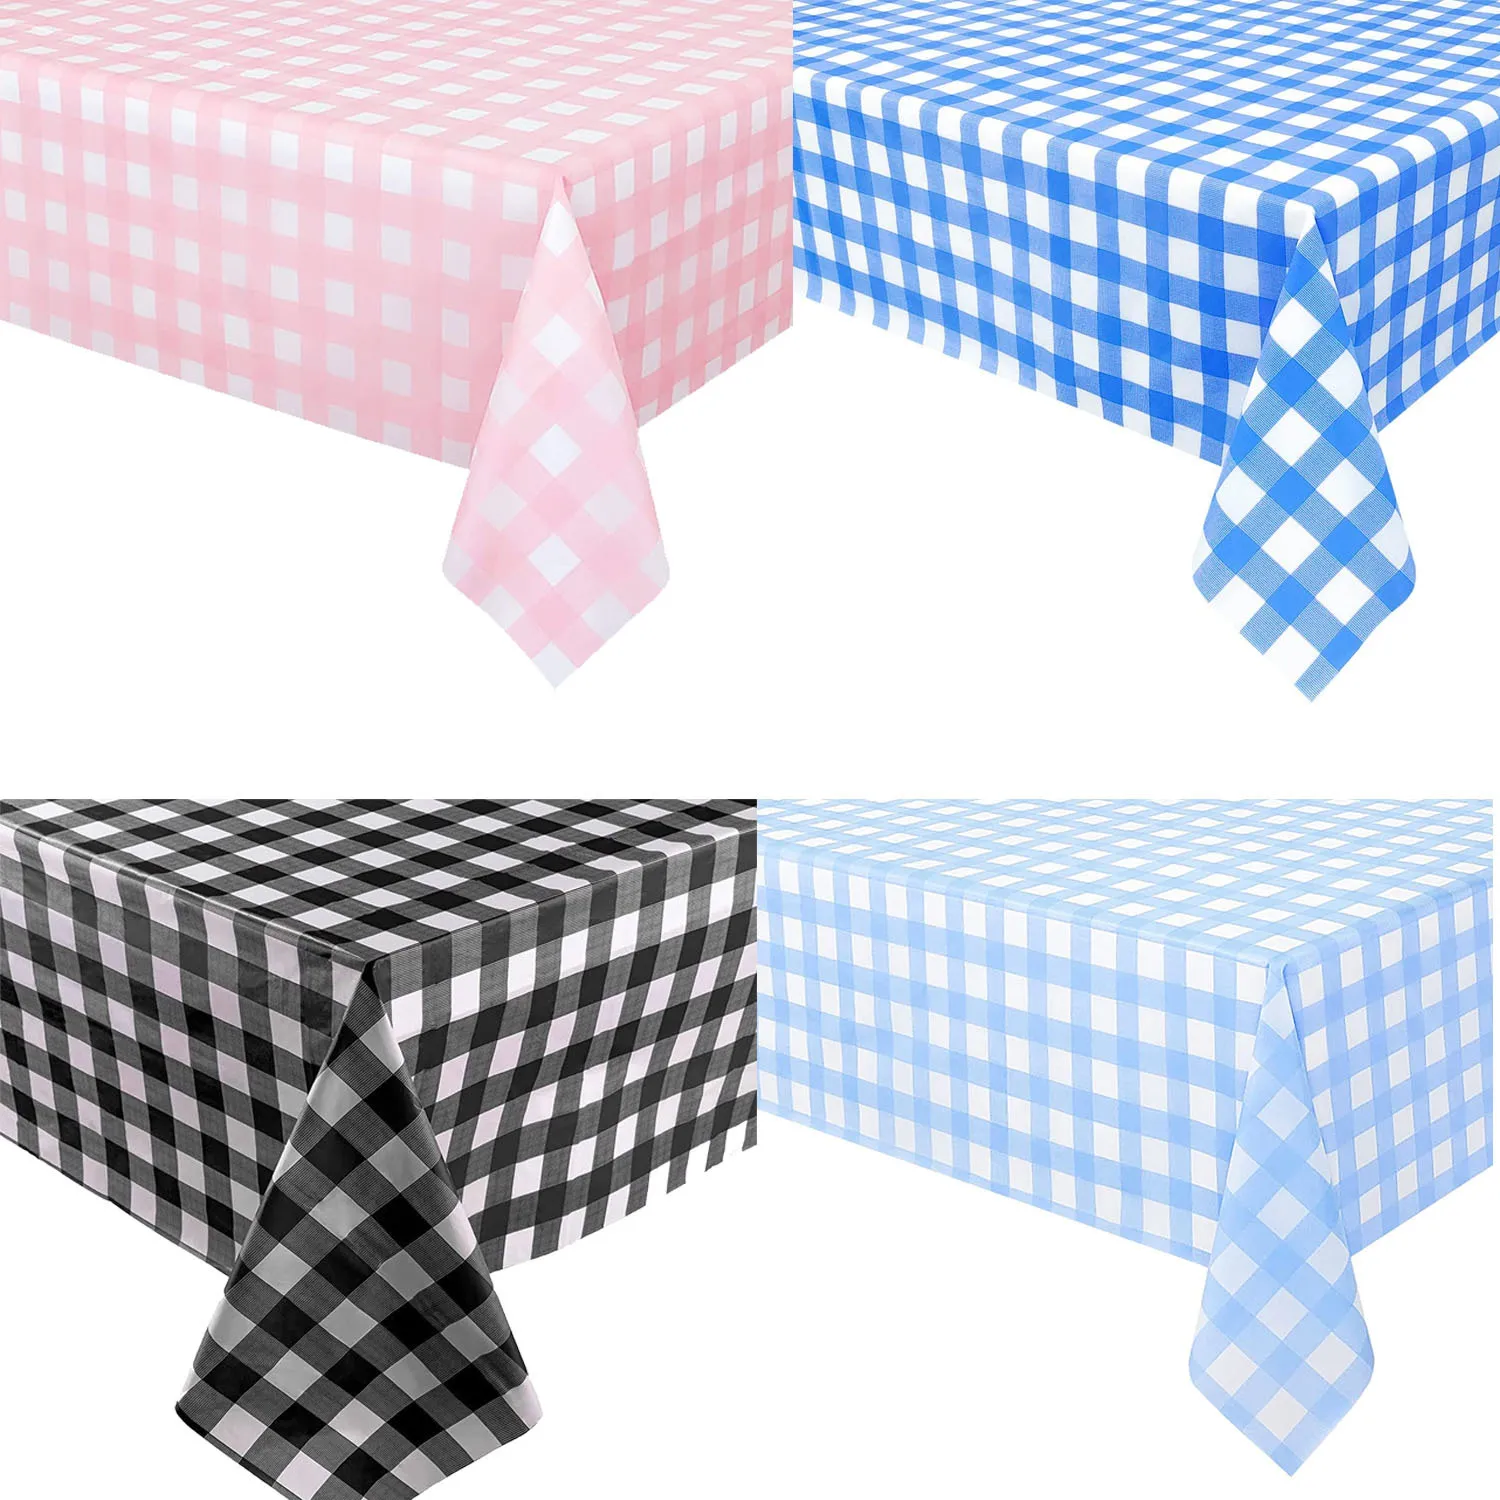 Red black and white checkered disposable plastic tablecloth rectangle waterproof and oilproof tablecloths